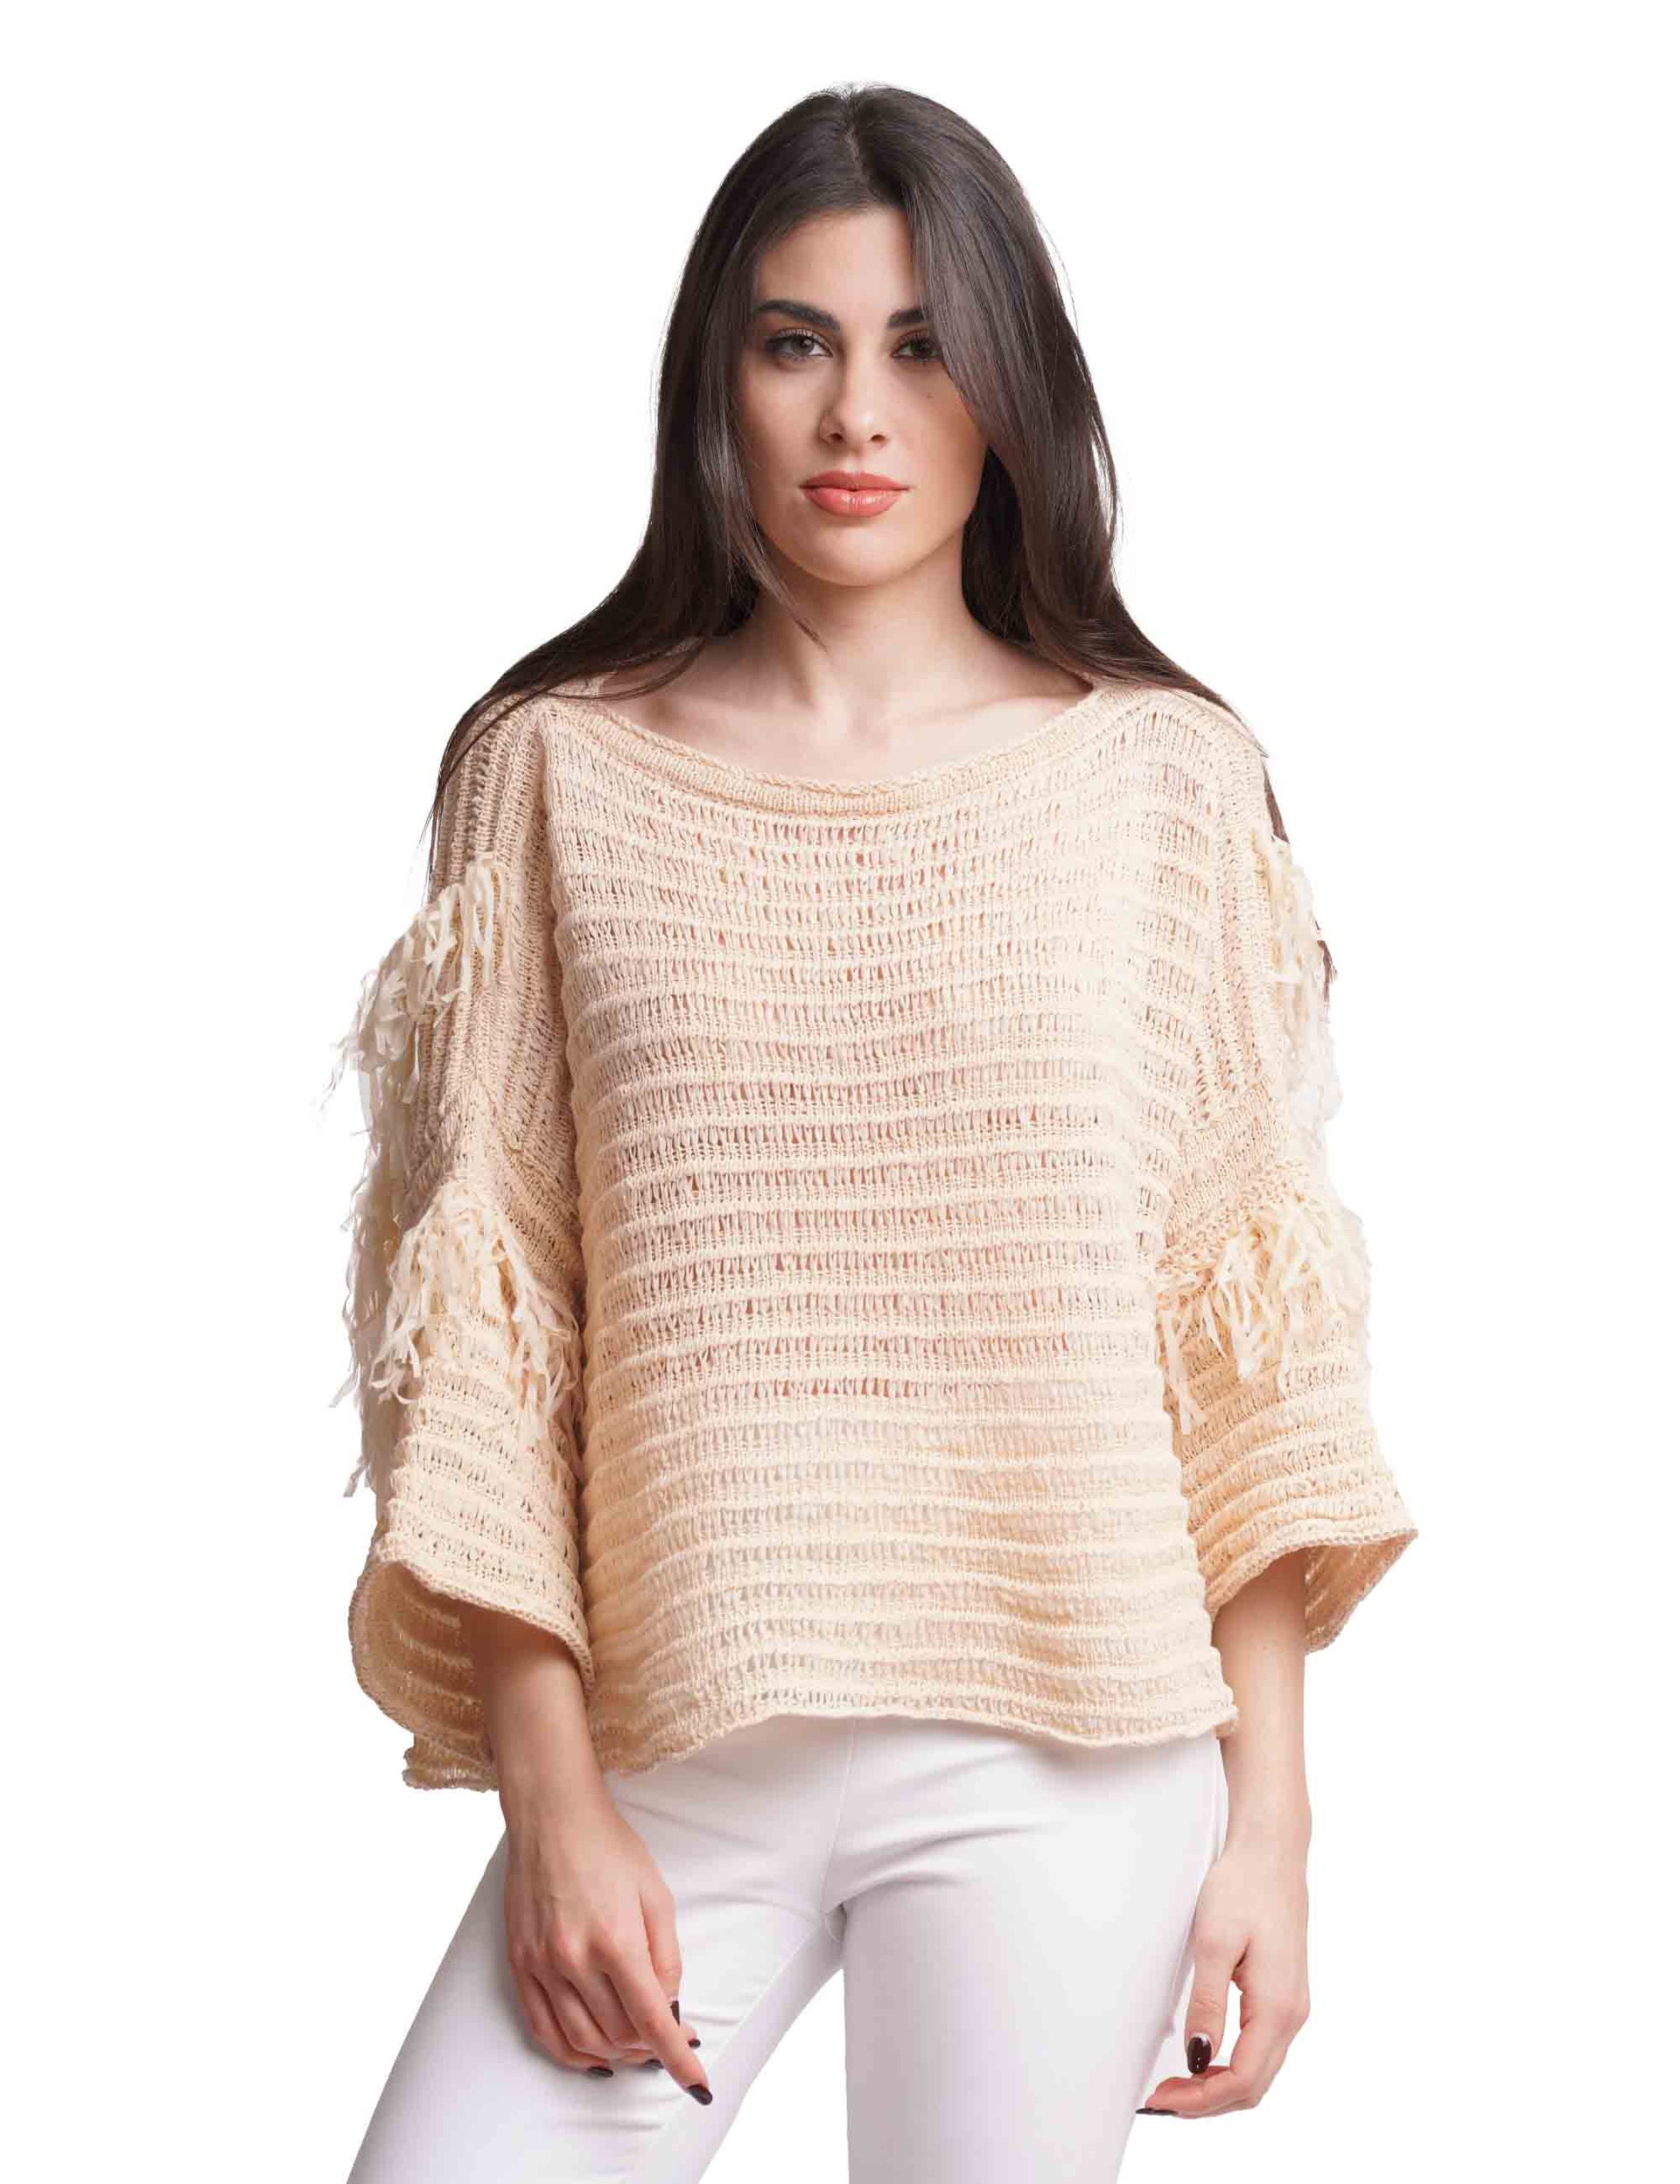 Women's Superlight Ribbon sweaters in beige fabric with 3/4 sleeves and fringes